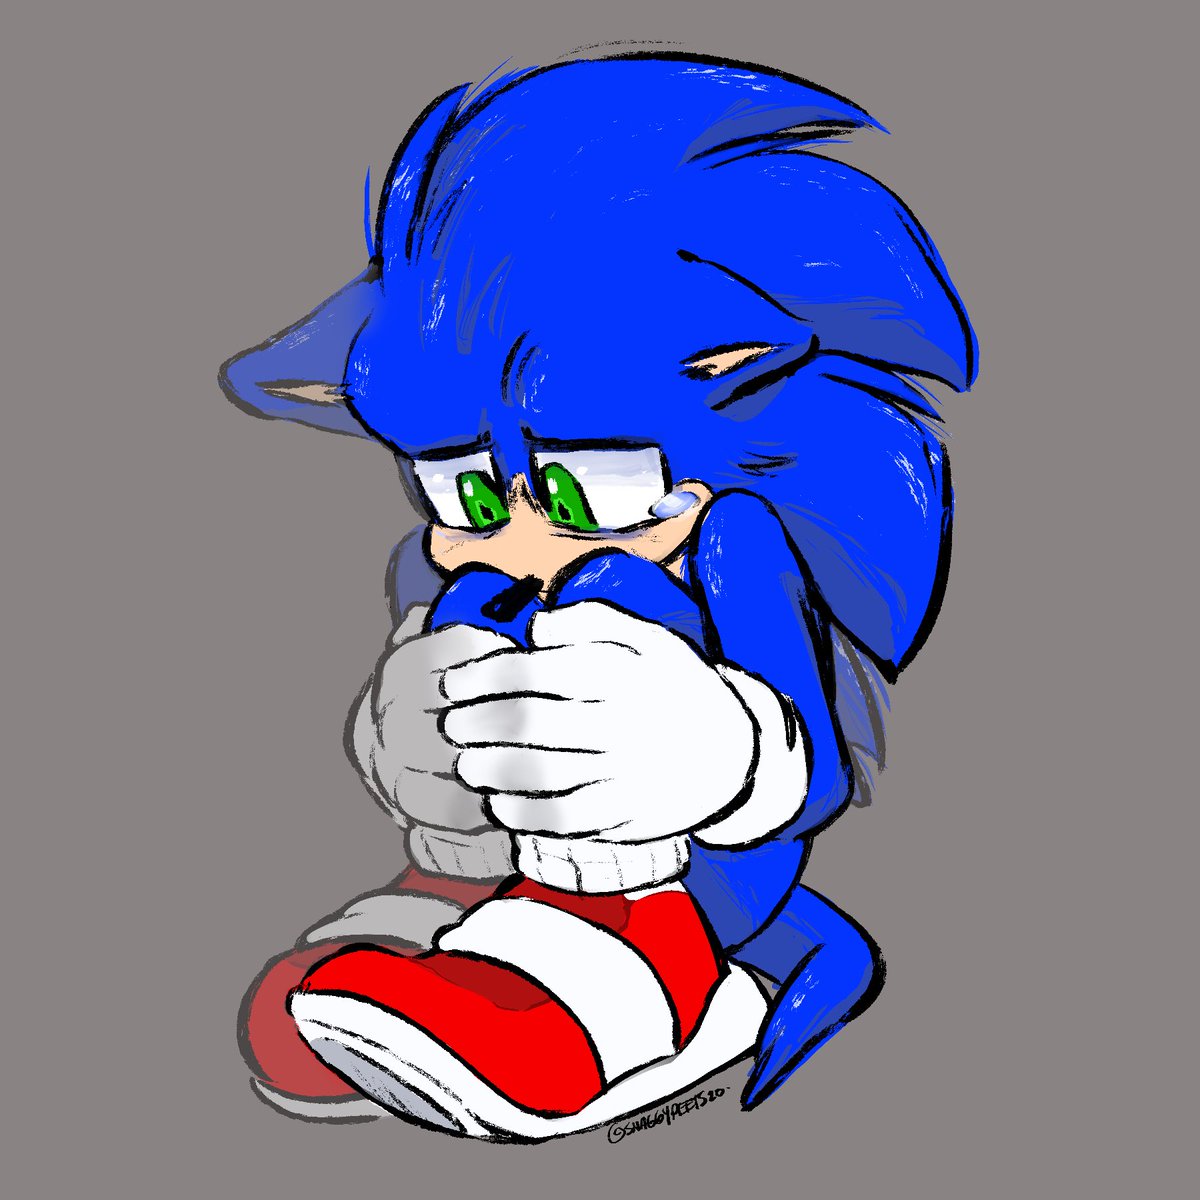 I liked everything about the movie But my favorite part was sad Sonic. 